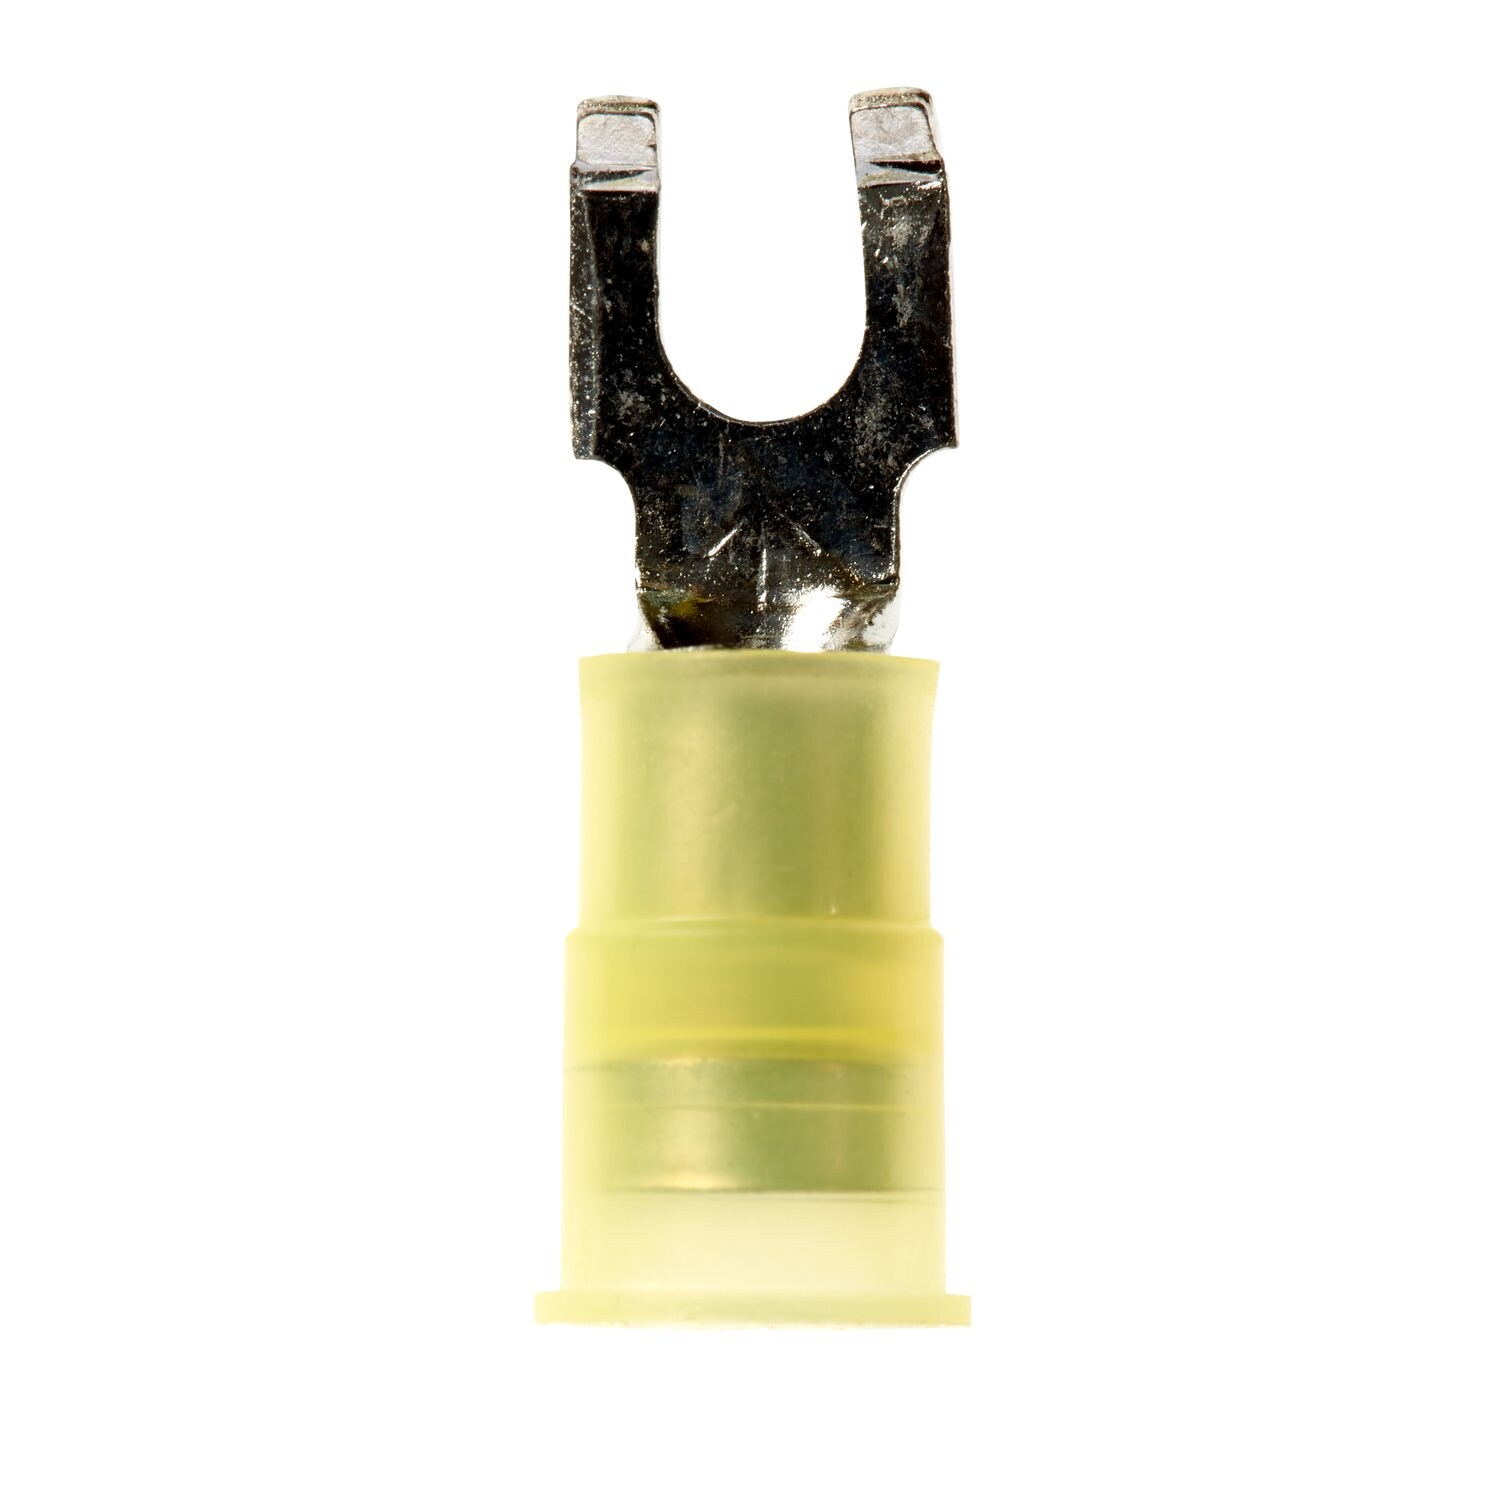 7100165318 - 3M Scotchlok Flanged Block Fork Nylon Insulated, 50/bottle,
MNG10-6FFBX, suitable for use in a terminal block, 500/Case